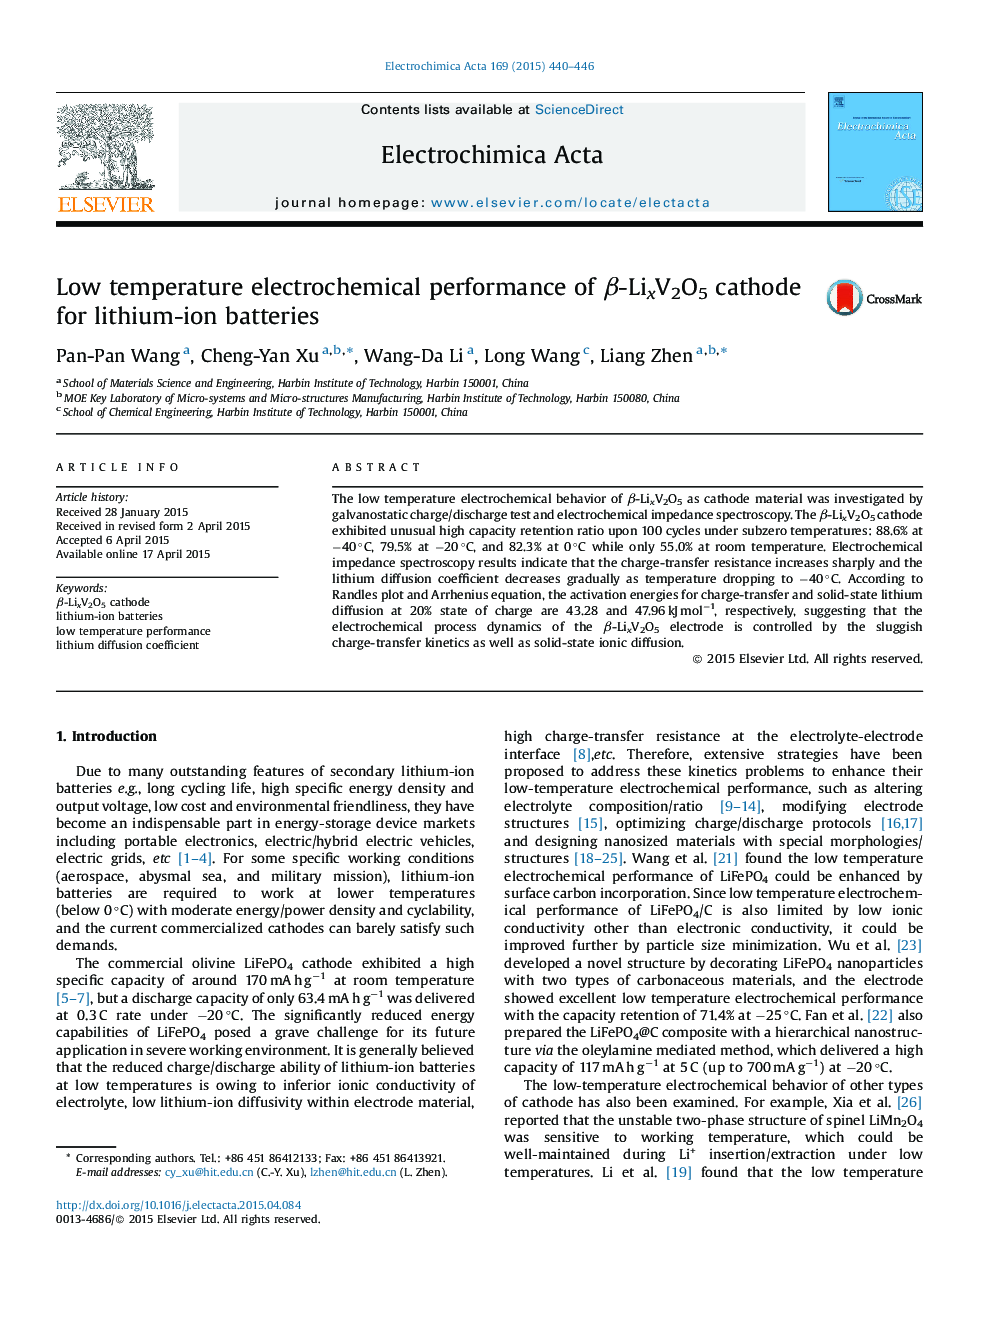 Low temperature electrochemical performance of β-LixV2O5 cathode for lithium-ion batteries